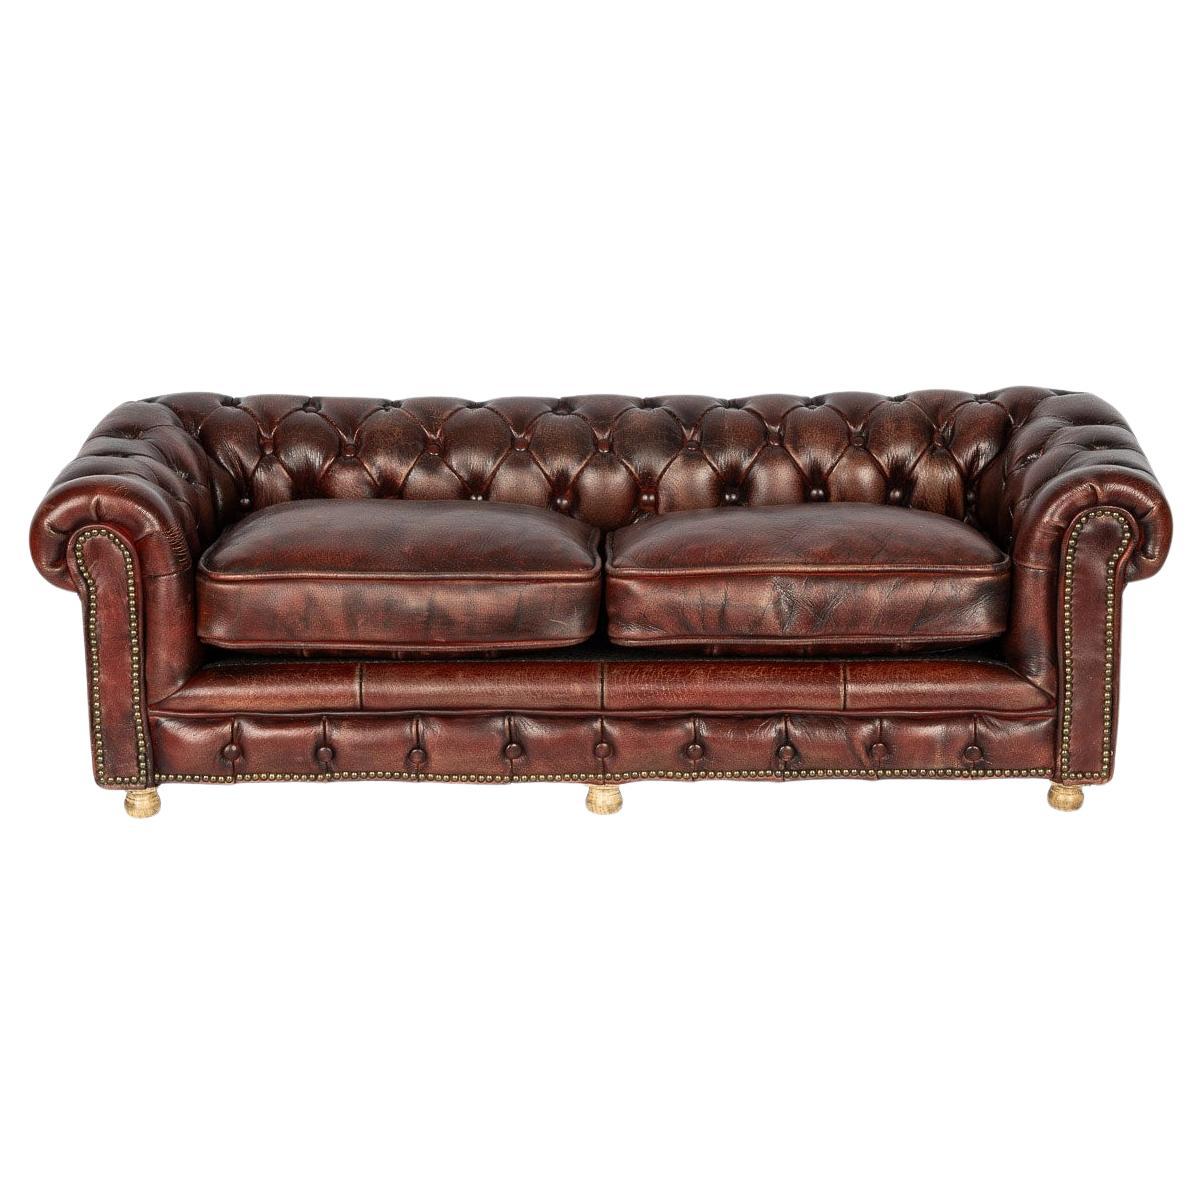 20th Century English Chesterfield Miniature Leather Sofa With Cushion Seats